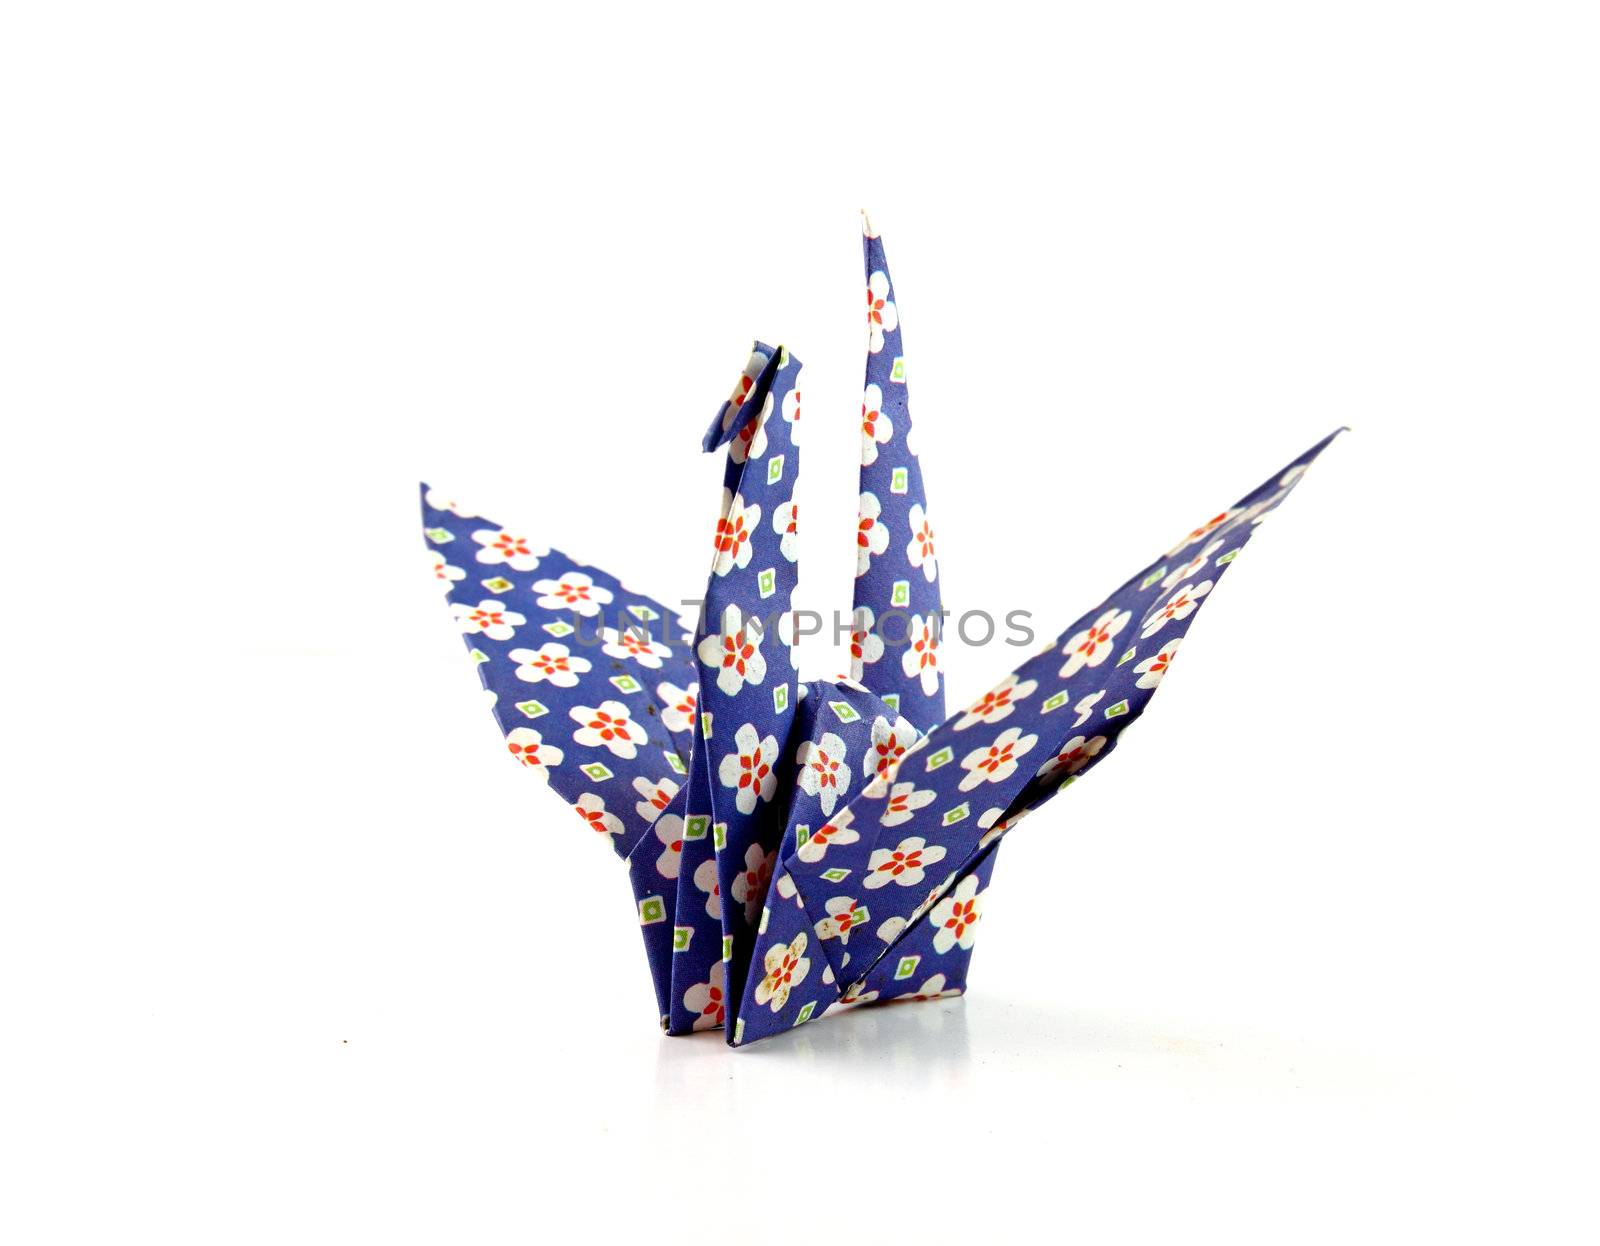 Crane origami bird folded with a floral pattern paper  by nuchylee